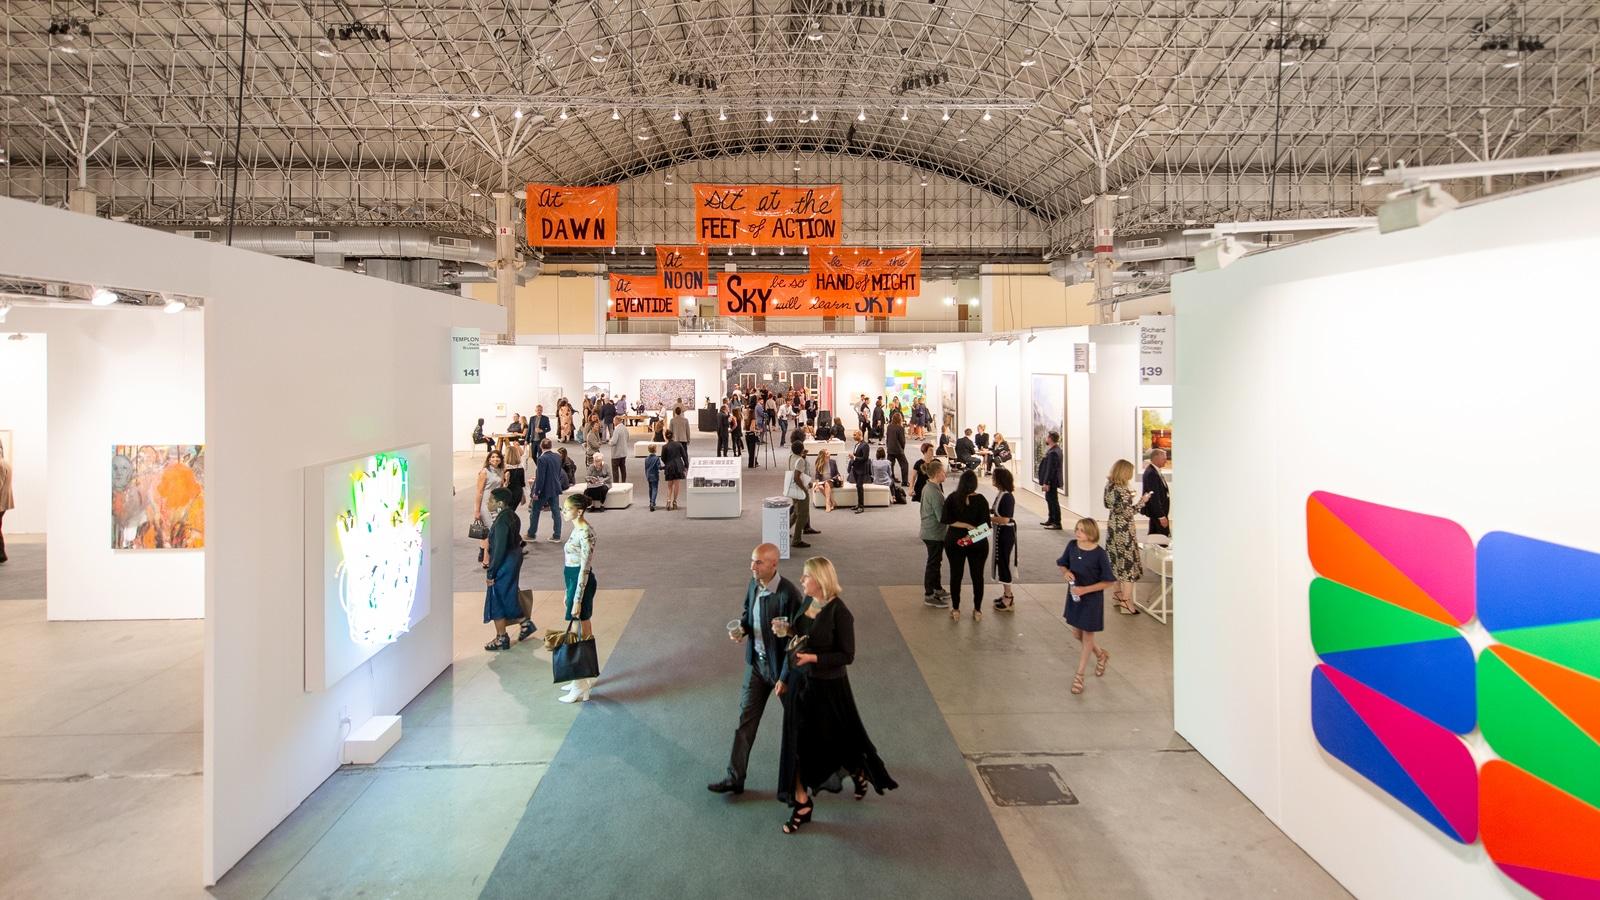 A vast open exhibition space of EXPO CHICAGO, the international exposition of contemporary modern art. The space, which looks like an aircraft hangar, is filled with visitors engaging with the art.